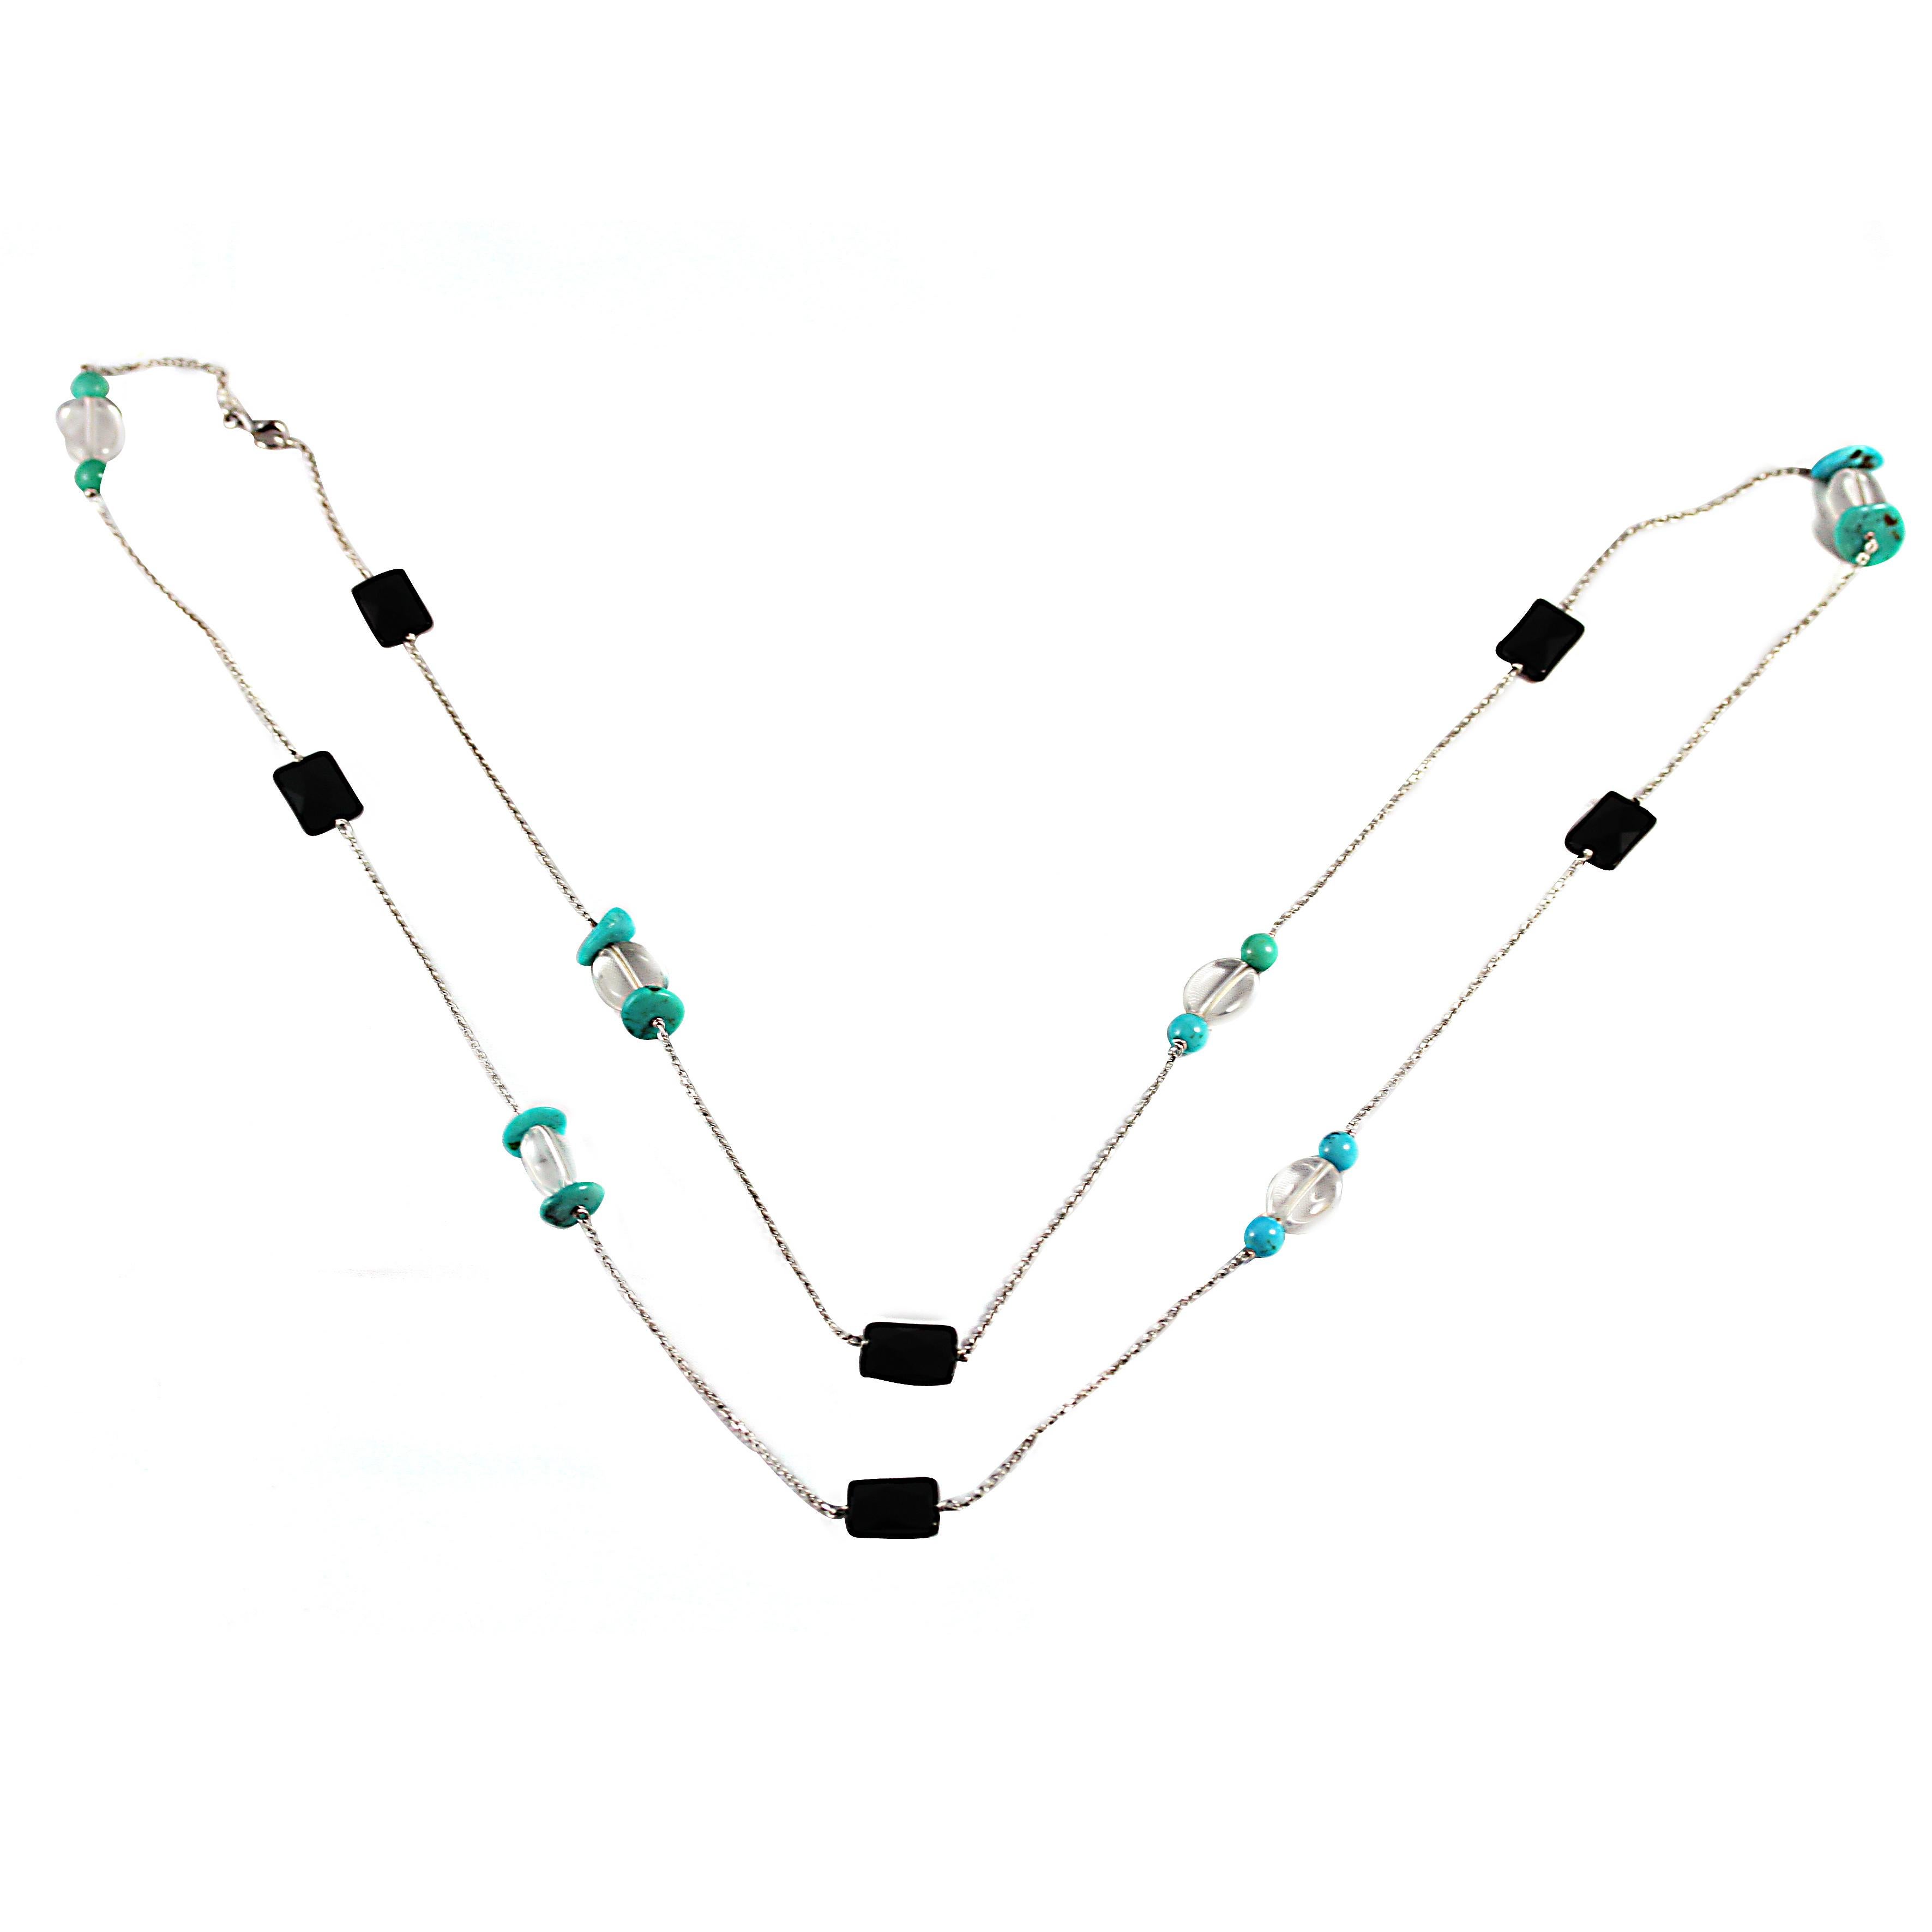 A fine necklace / sautoir made of an 18K white gold chain set with turquoises, rock crystal and onyx.

White gold, 18 carats 750 / 1000th.

Length: 100 cm, (39,370 inch)

Can be worn single or double.

One of a kind piece !